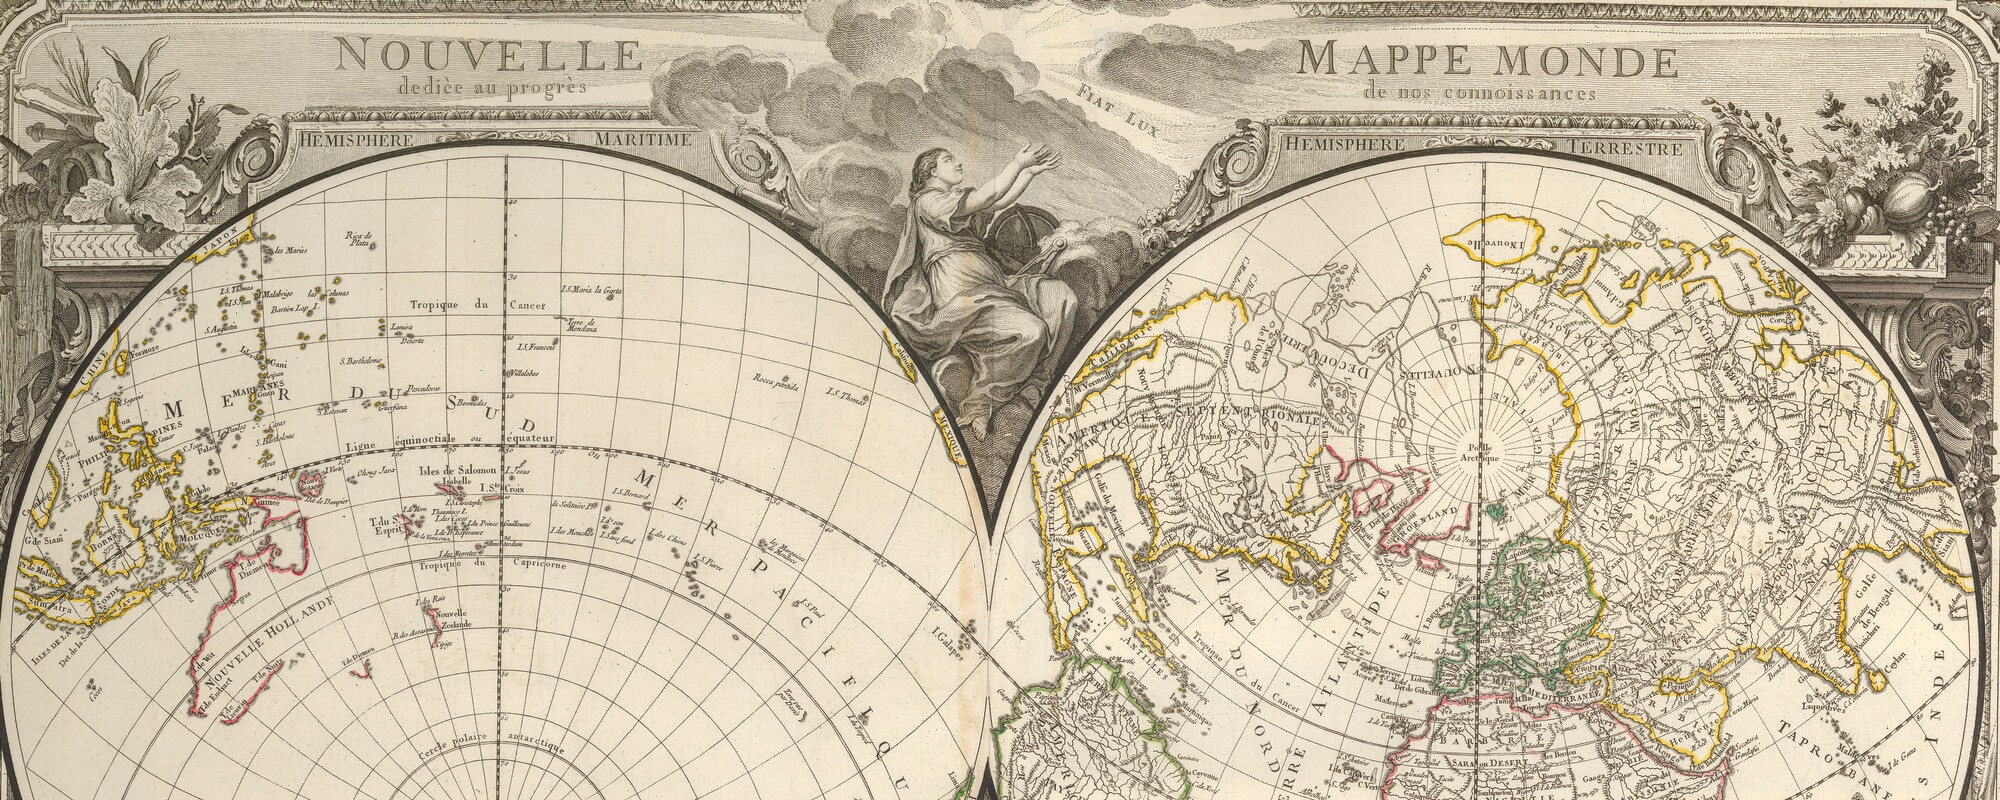 Theatre of the world: atlases in the Geography Library’s collections